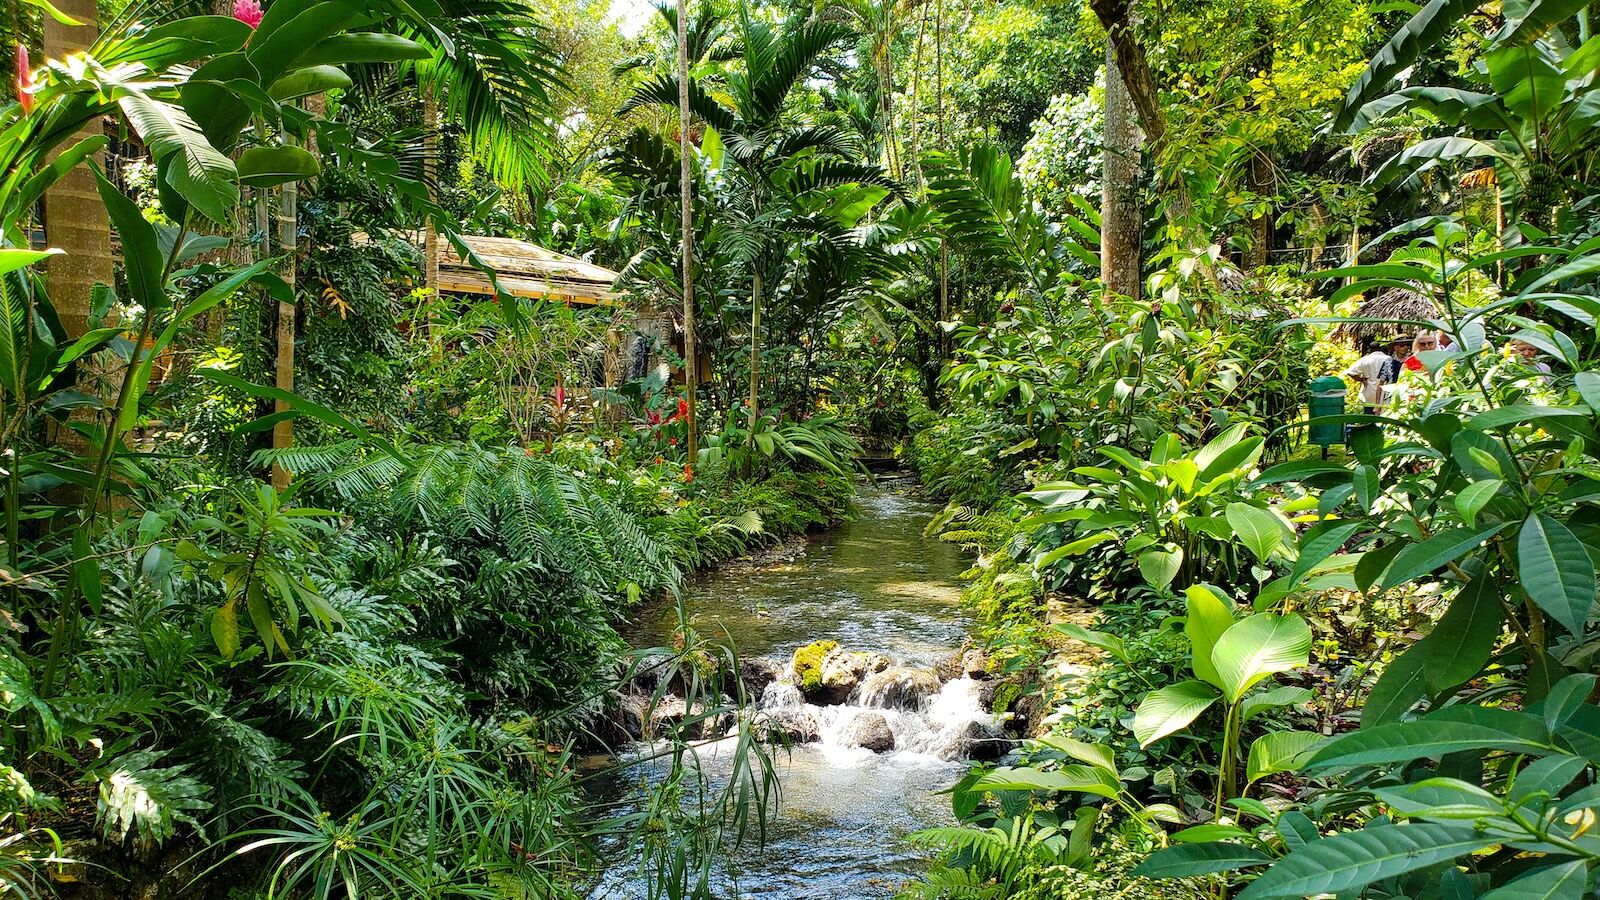 Beautiful, tropical, lush, green garden in Konoko Falls, Ocho Rios, Jamiaca with a lot of foliage and scenic river flowing through the middle on a spring day.